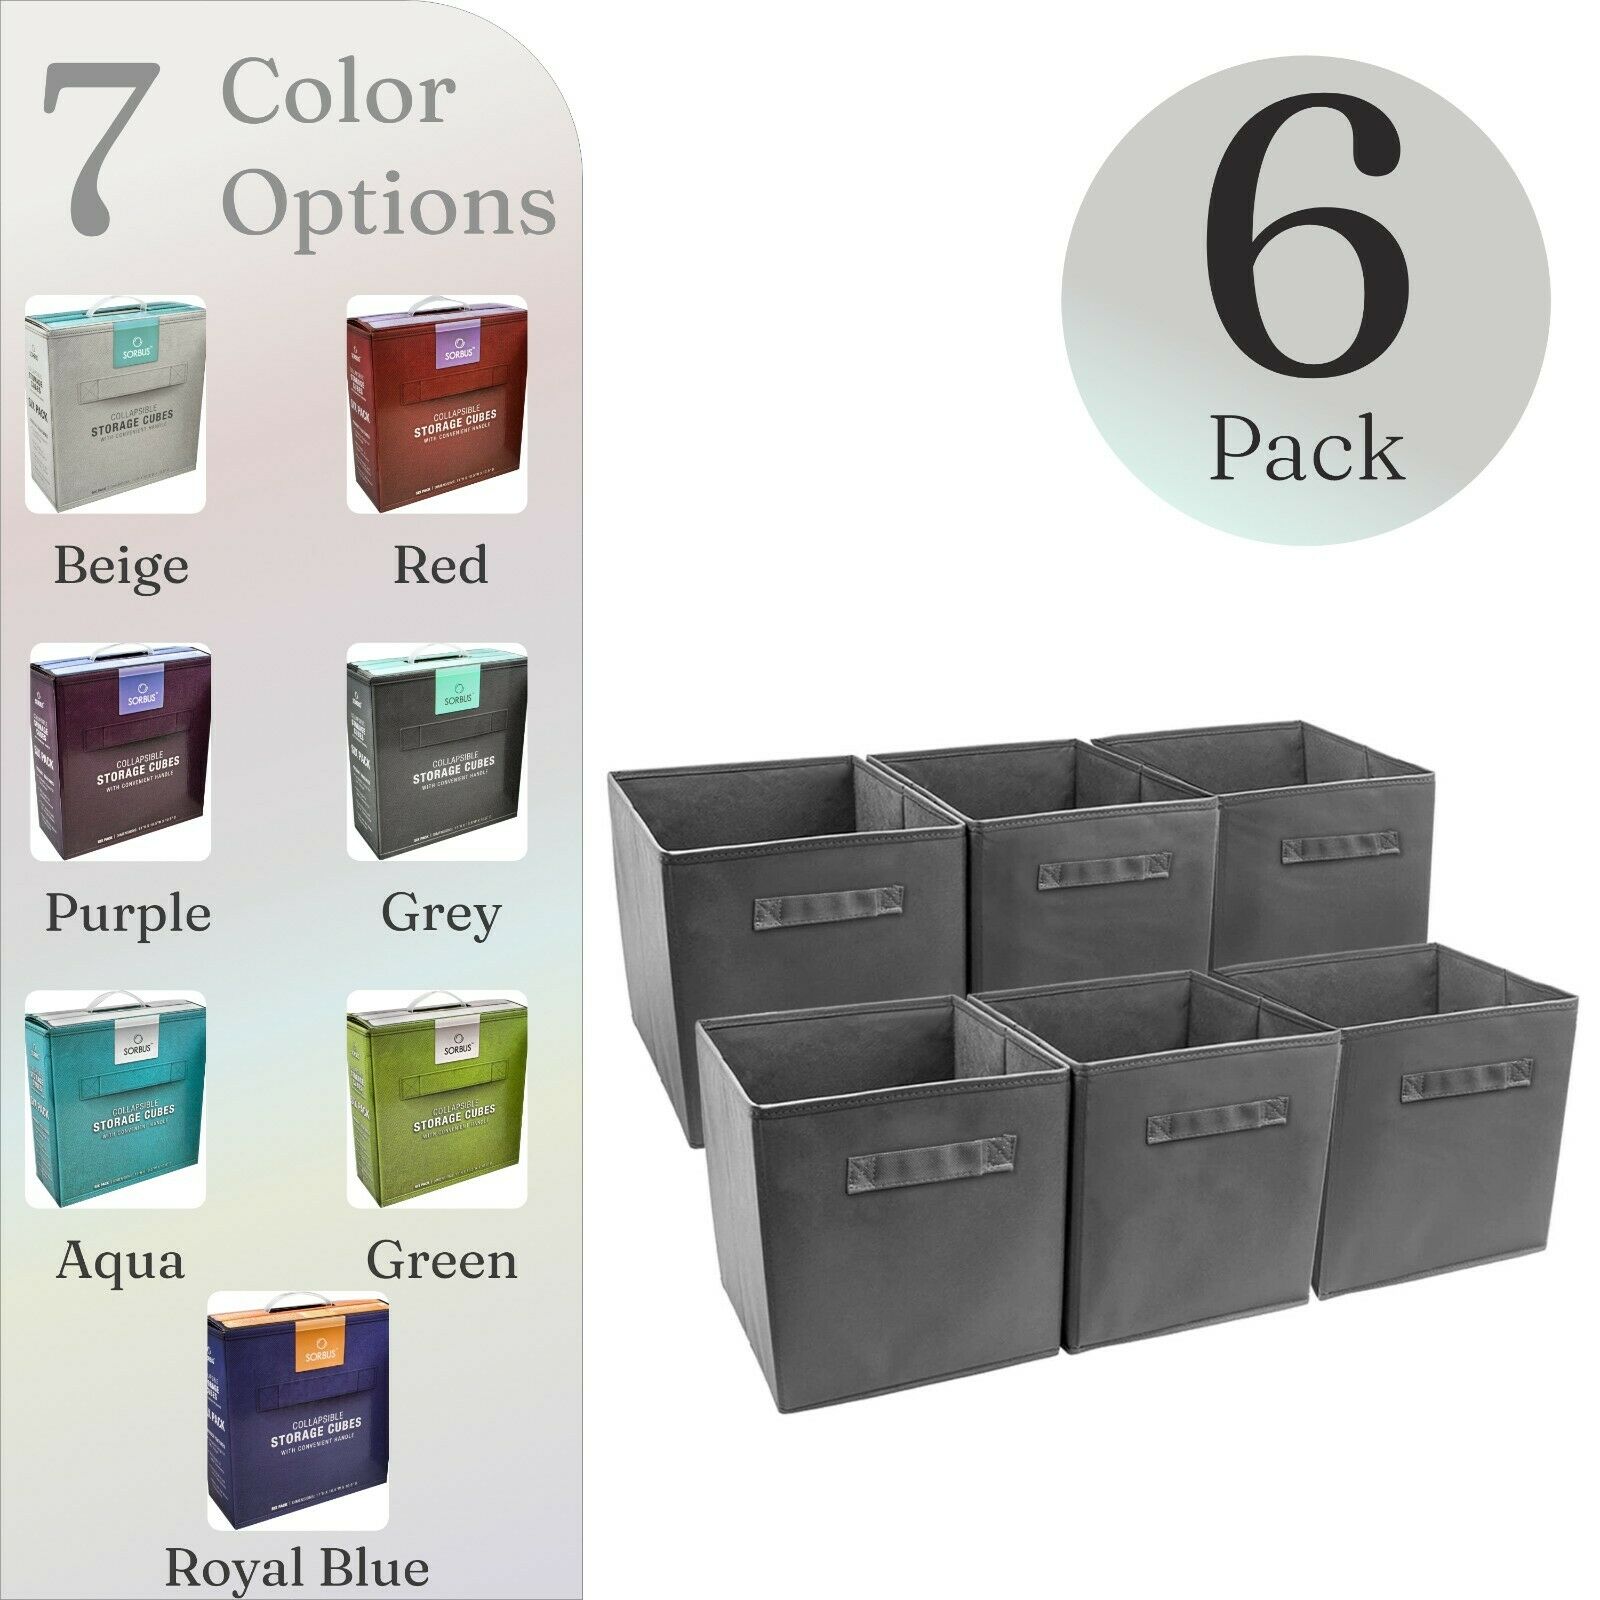 6 Foldable Storage Cube Basket Bin Cloth Baskets For Shelves, Cubby Organizers